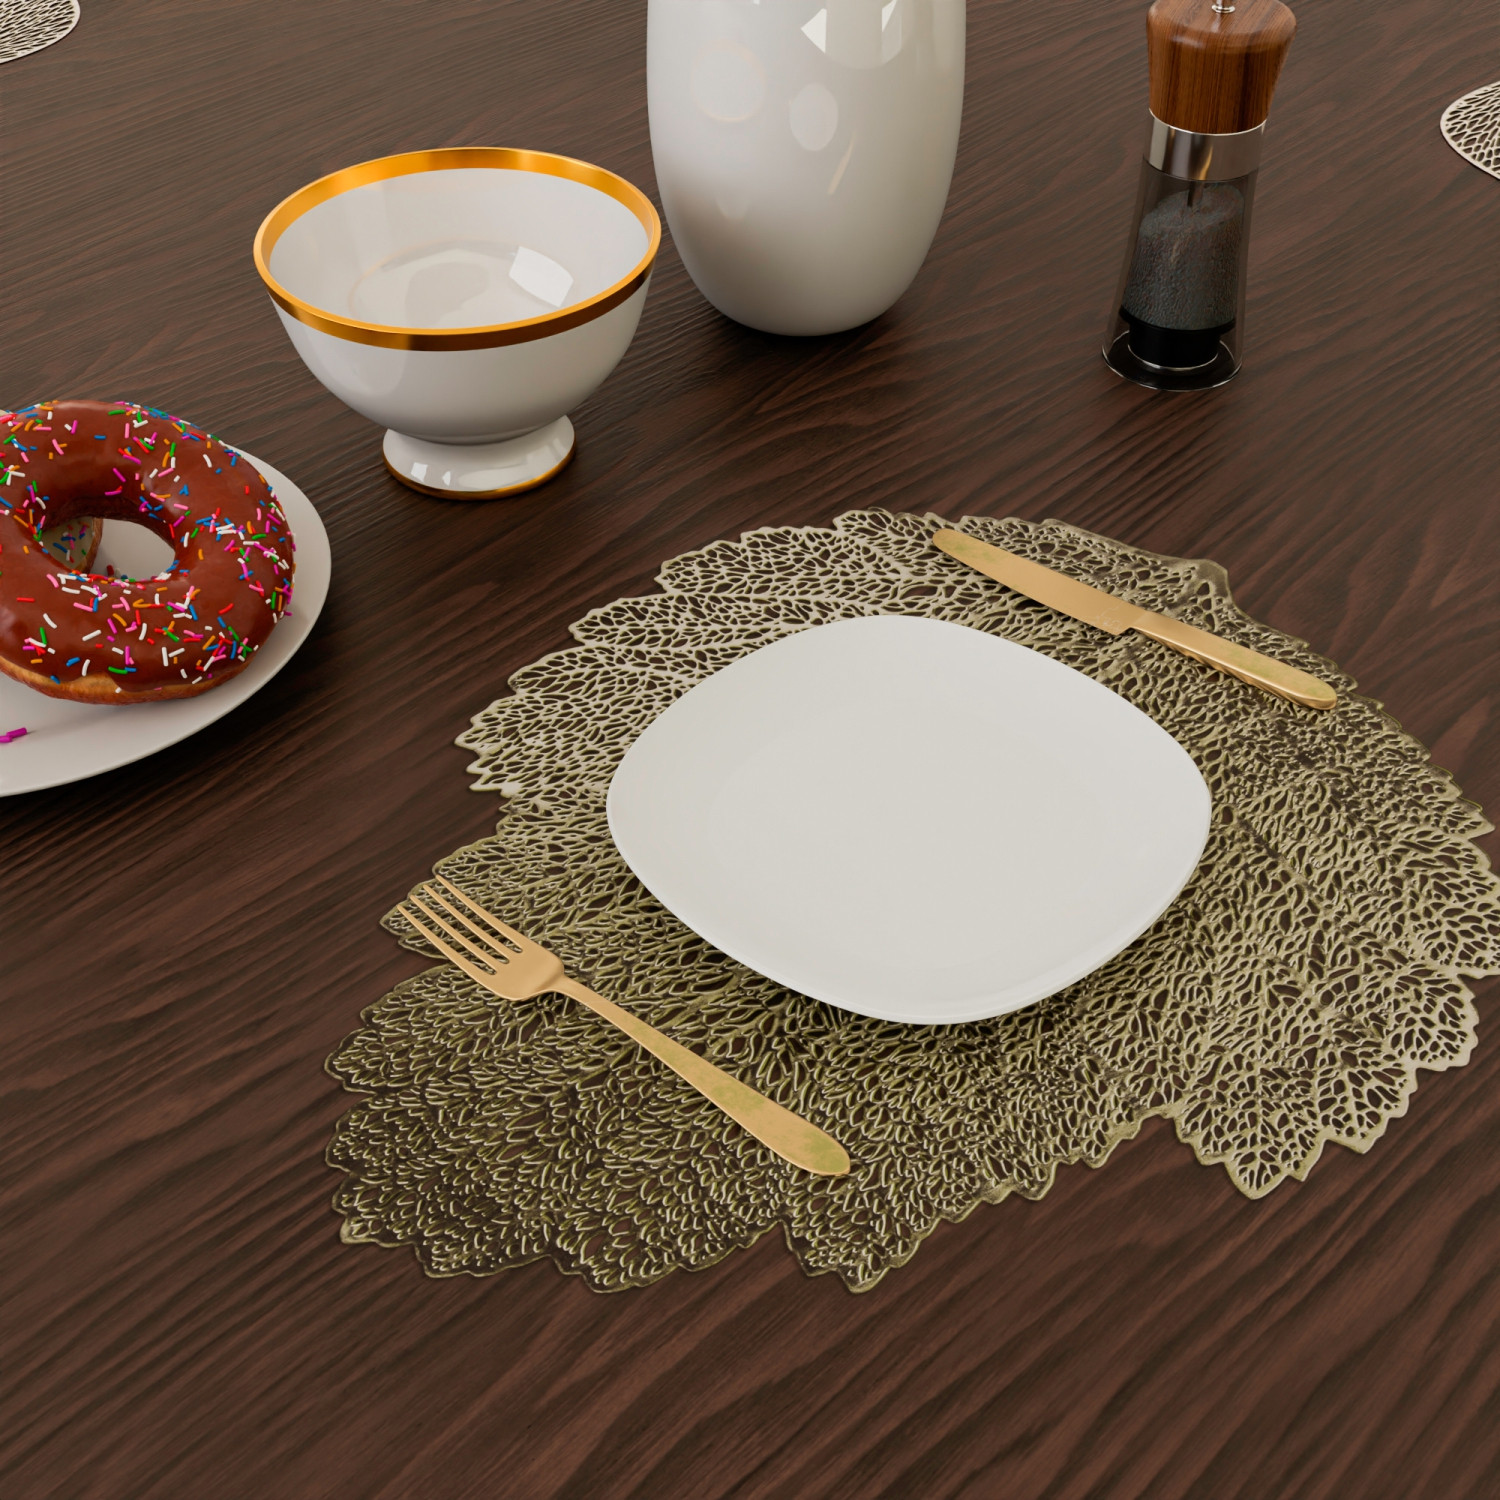 Kuber Industries Placemat | Placemats for Dining Room | Designer Table Mat Set | Placemats for Kitchen Table | Side Table Placemats | Patta Shape Placemat |Golden